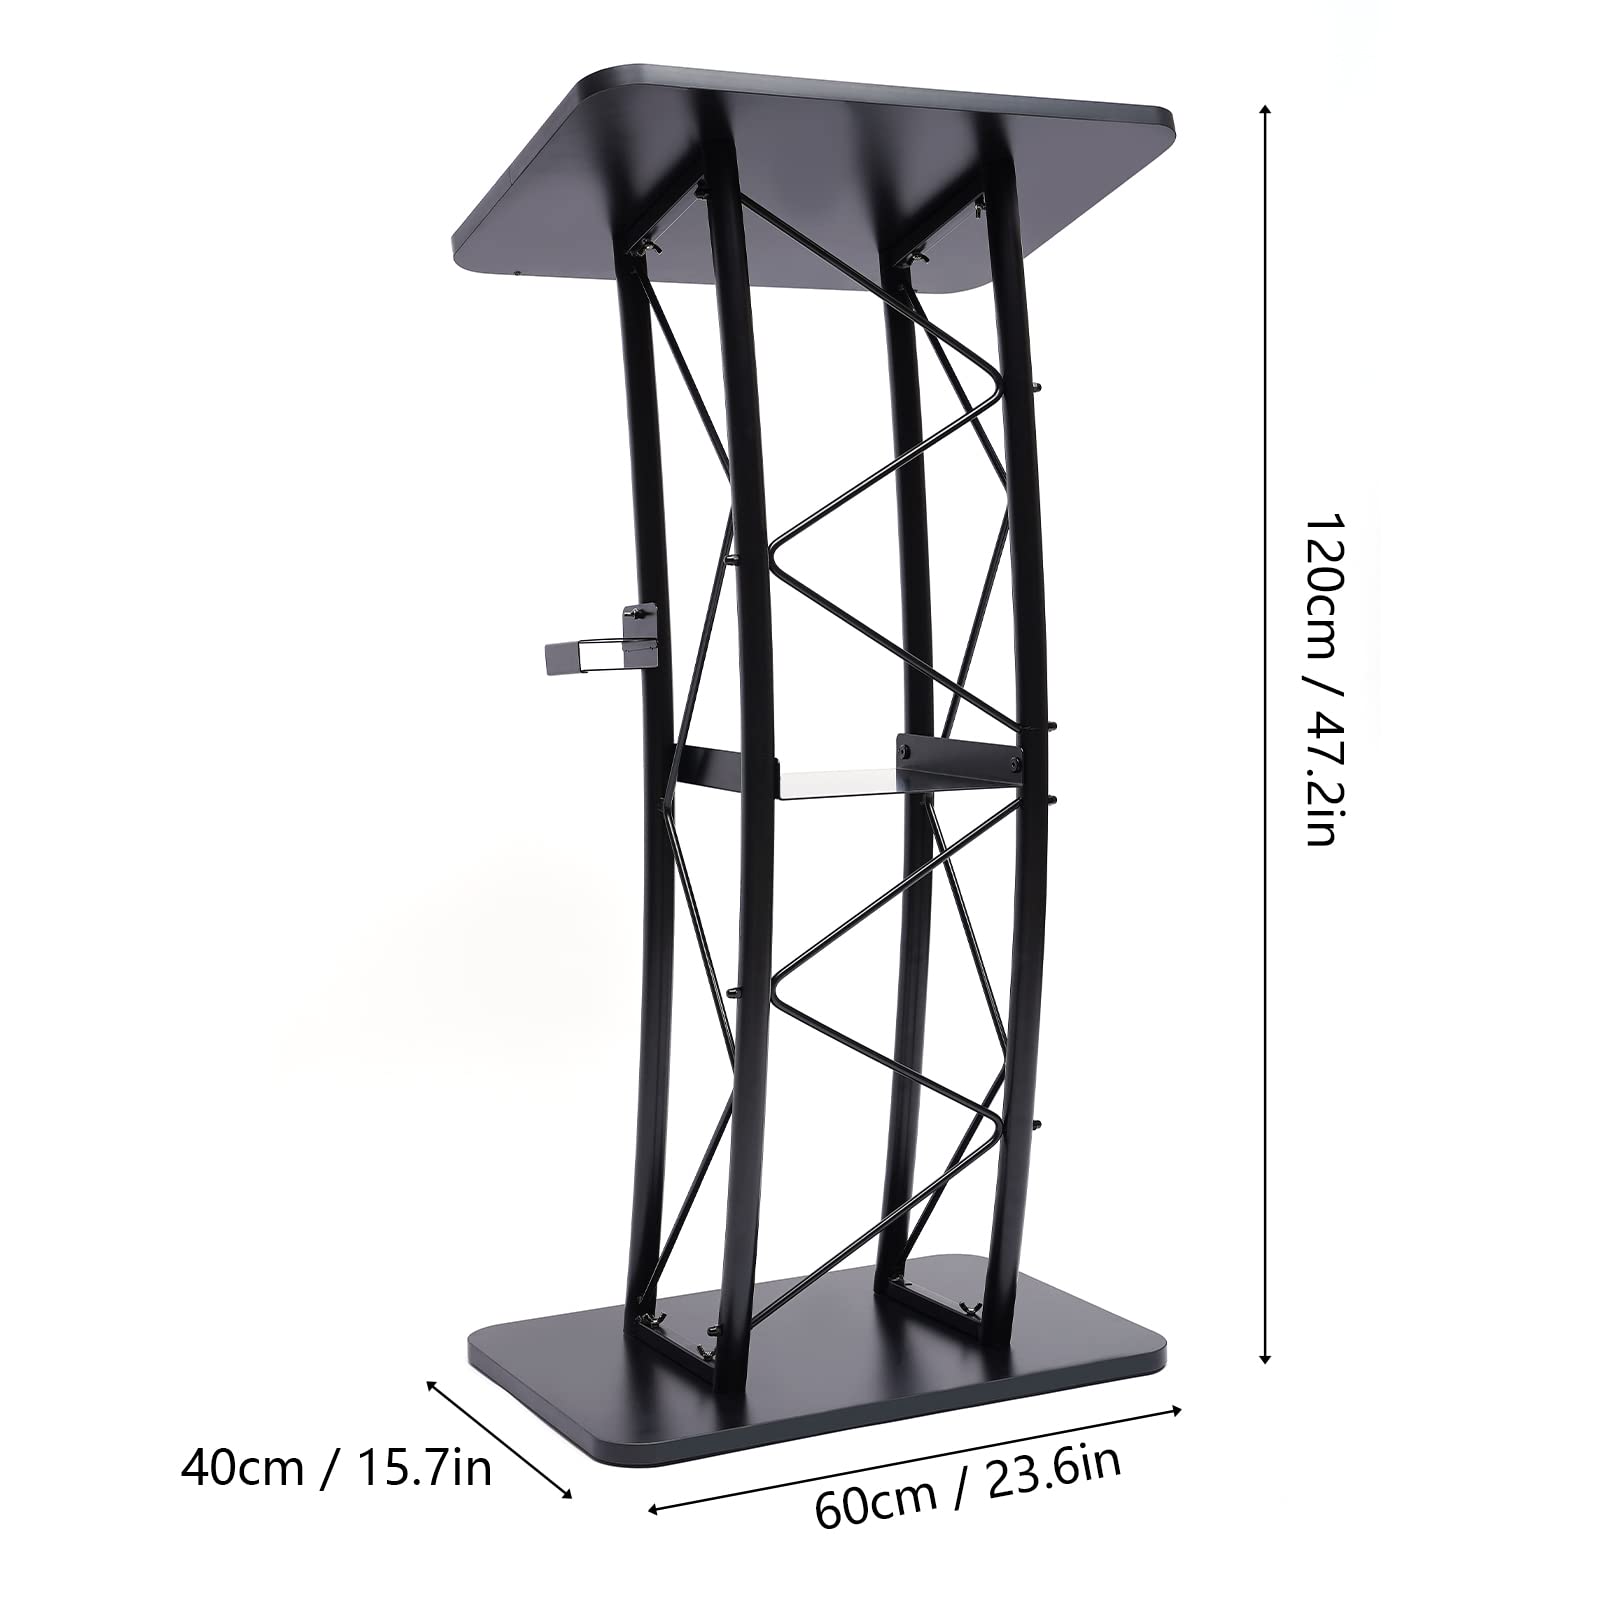 Metal Podium Pulpit with Storage Shelf and A Cup Holder,Curved Podium Metal Black Lectern Podium Stand Portable for Schools, Conference Podium,Stages,Churches,Classrooms 23.8x15.9x47inch